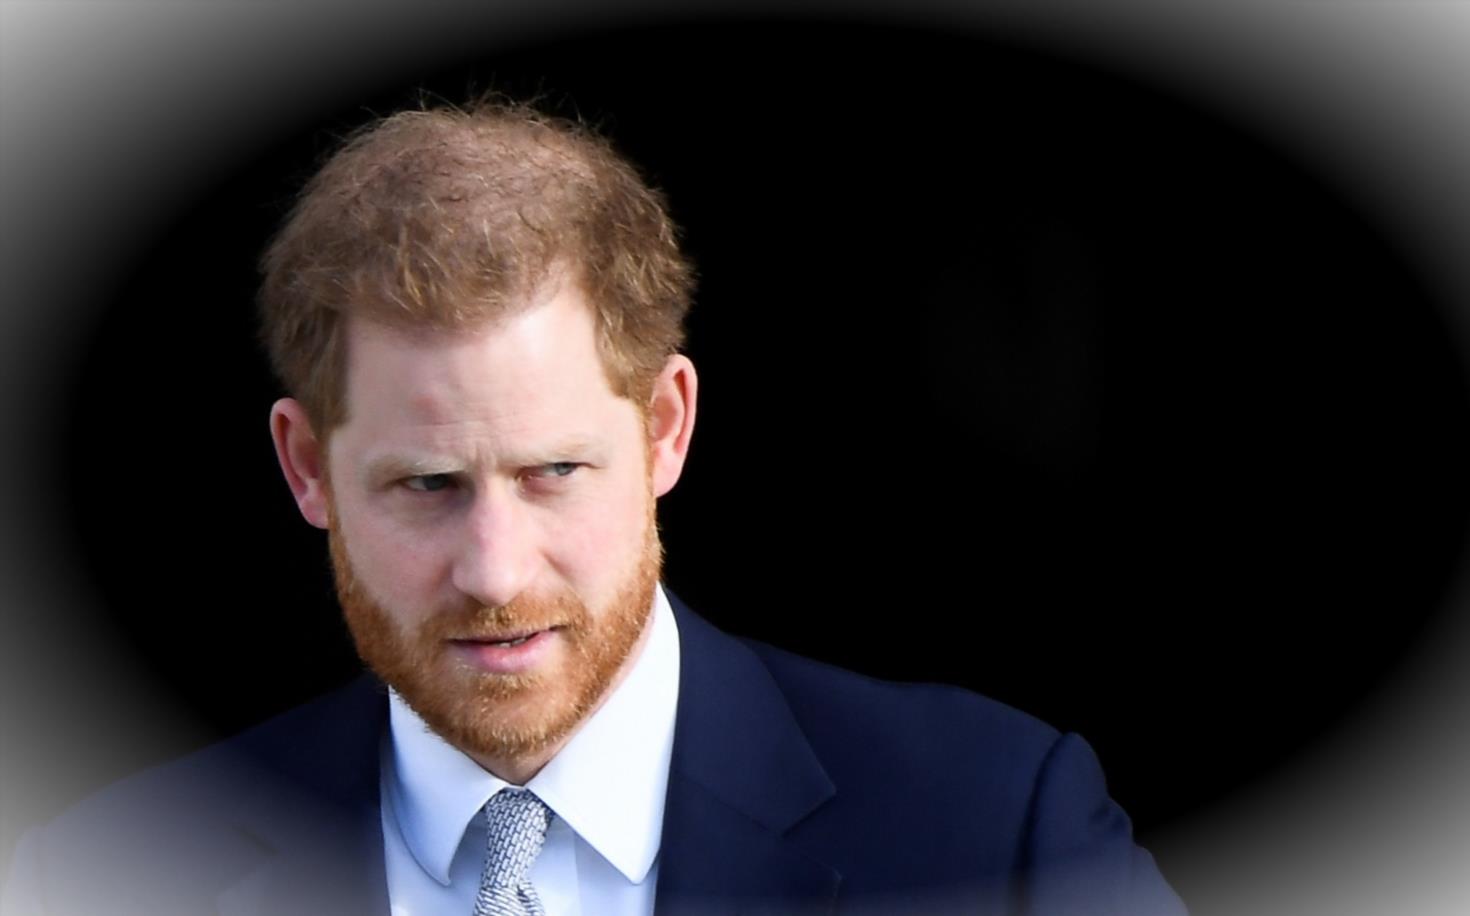 Prince Harry Faces Difficult Coronation Without Meghans Support81ee34w 1